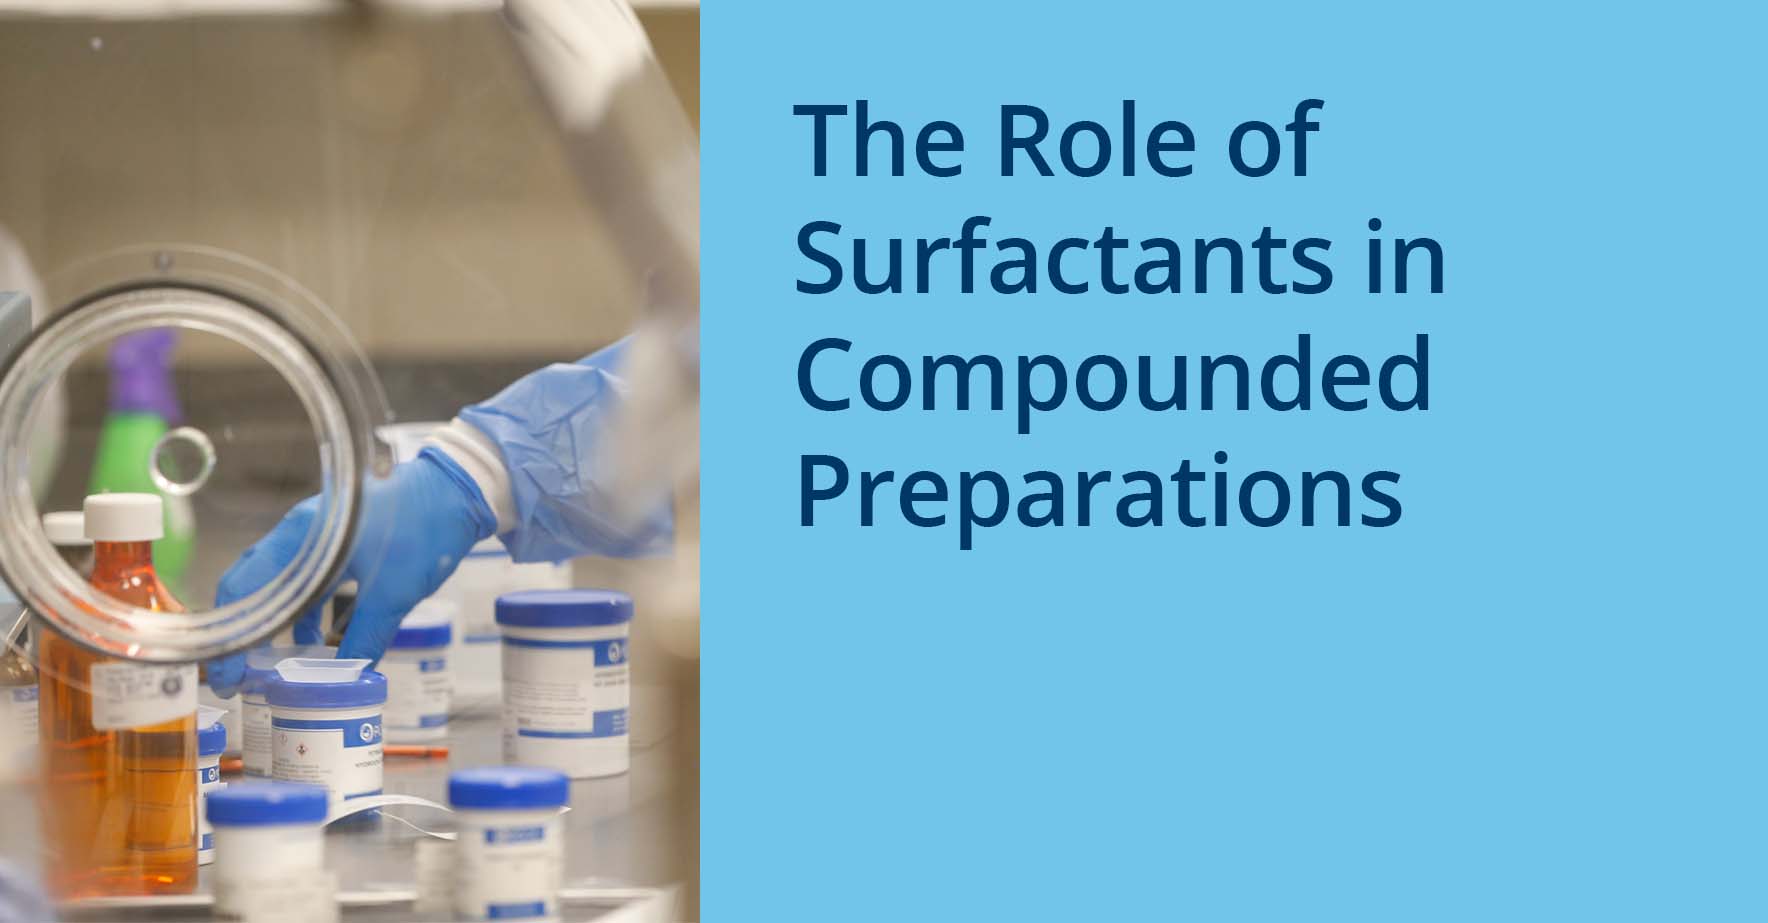 the_role_of_surfactants_in_compounded_preparations.jpg